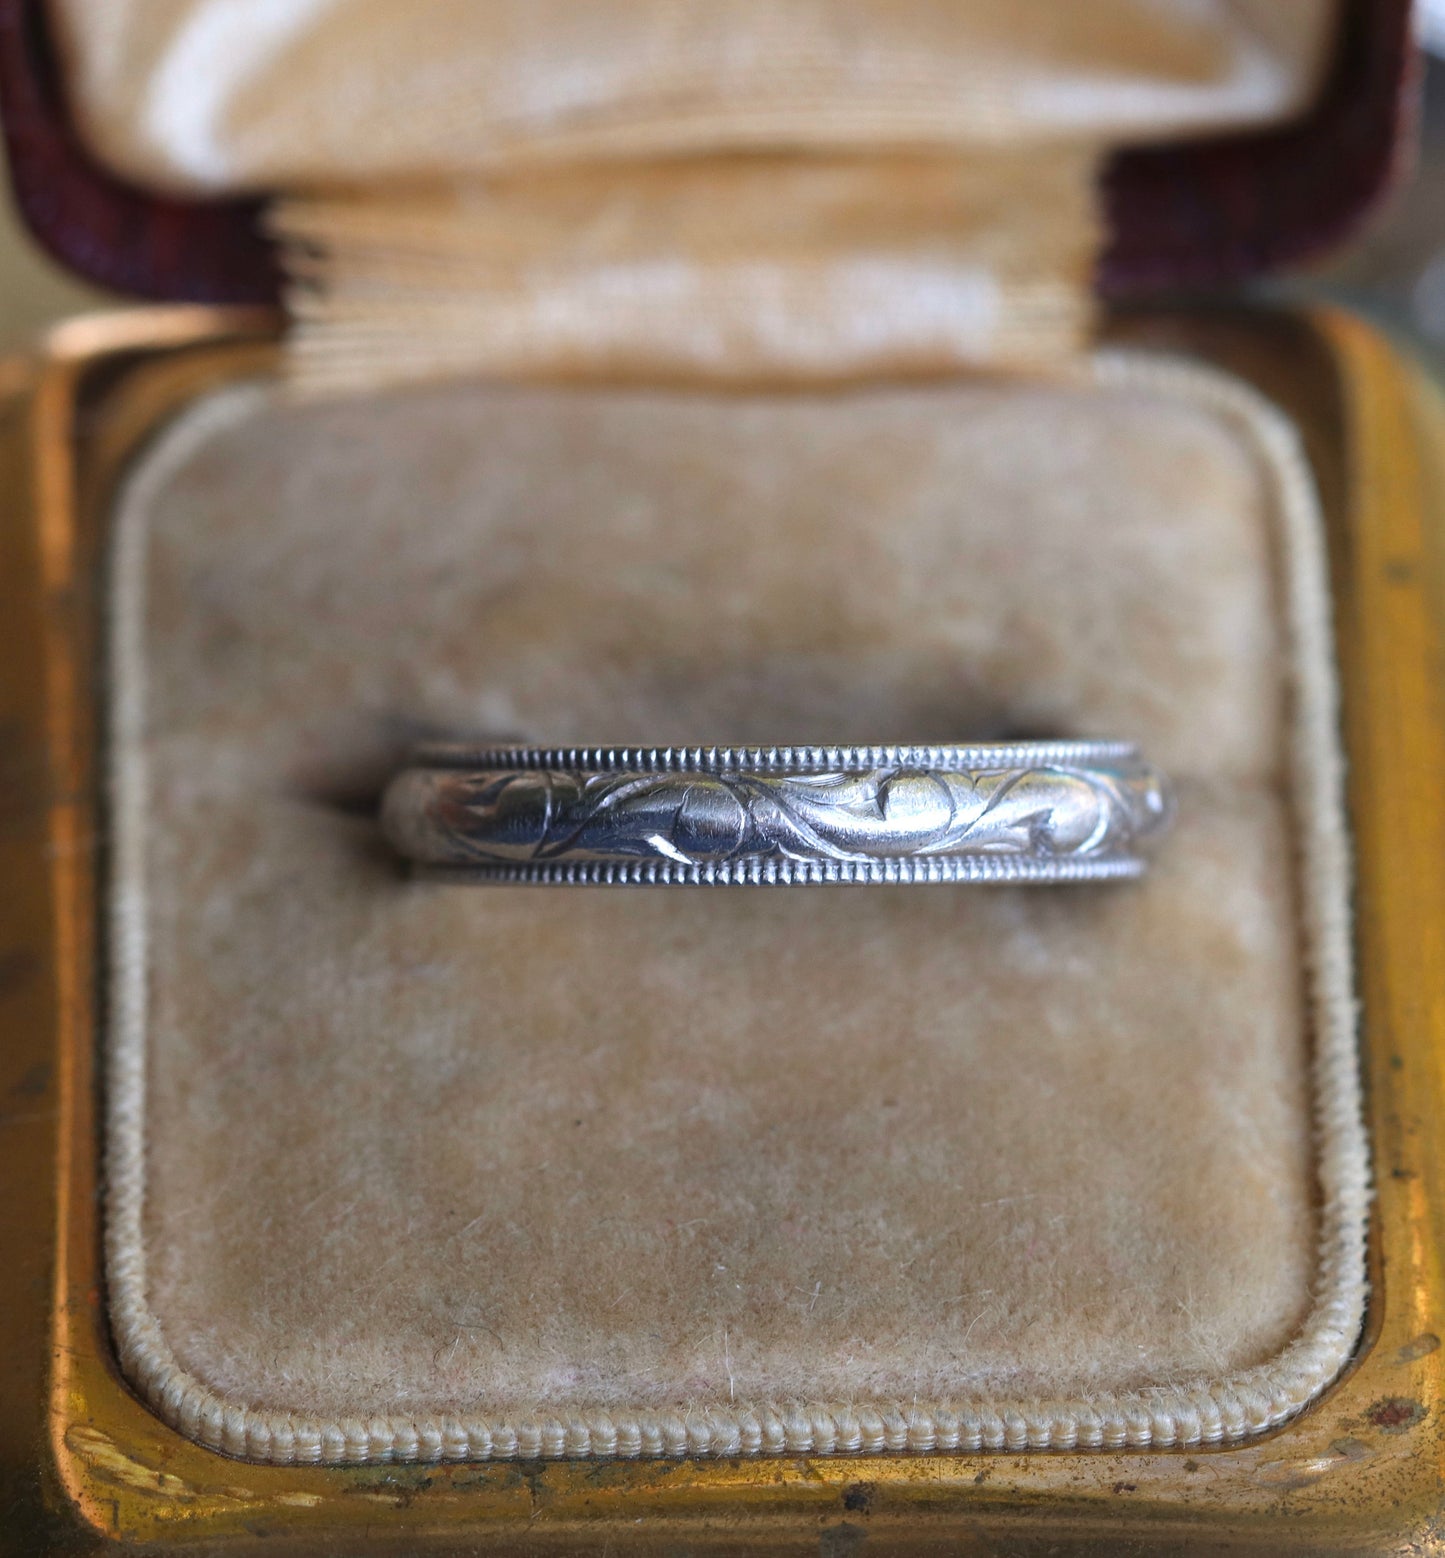 Heavy platinum wedding band engraved and inscribed size 7.25 not sizable